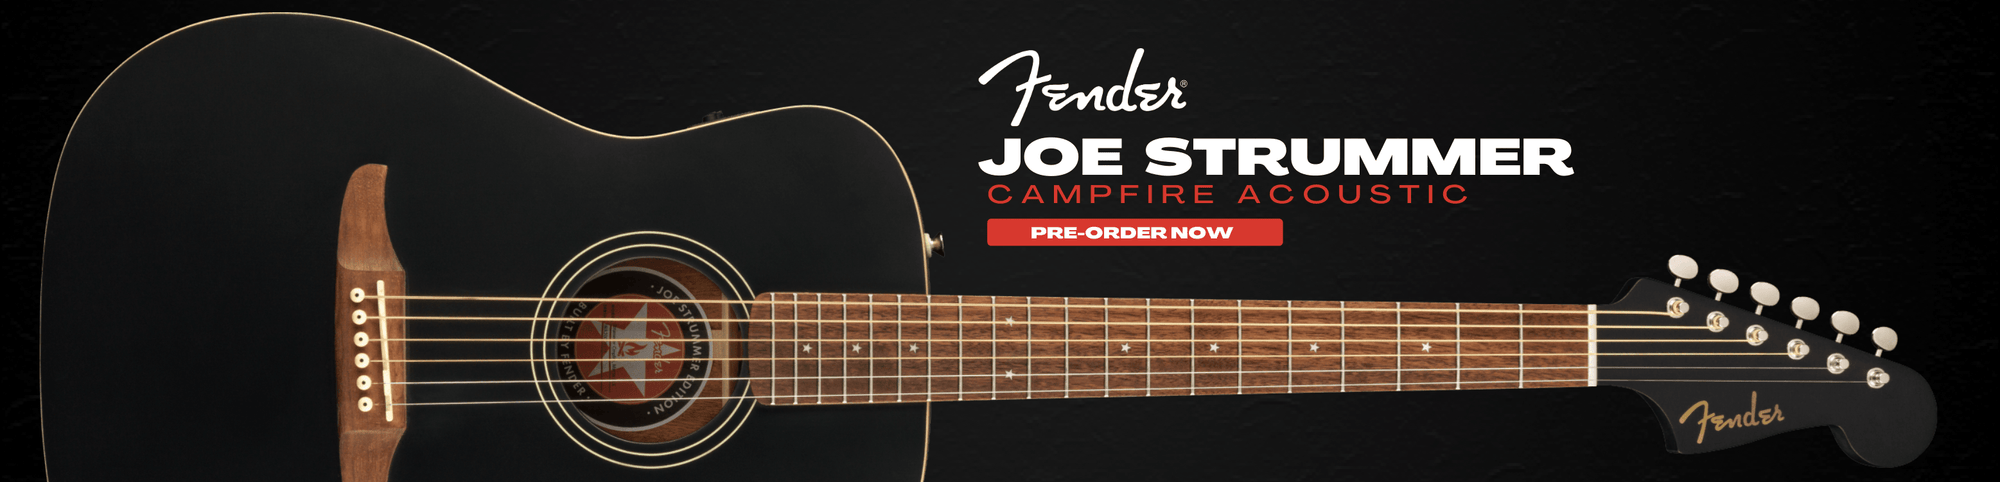 Fender "clashes" with Joe Strummer to create the 'Campfire' acoustic.-Sky Music